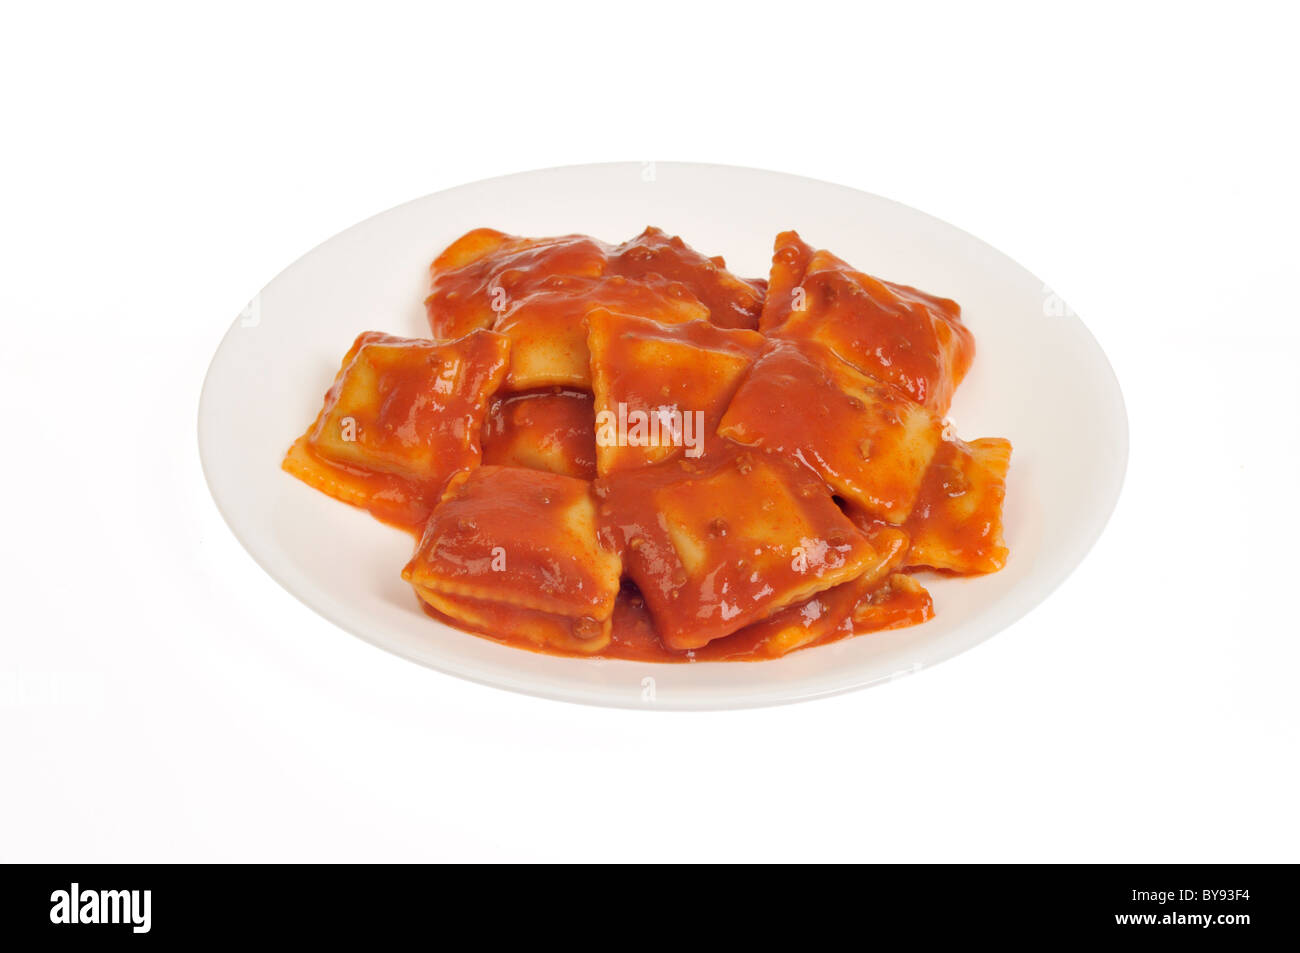 Plate of Beef Ravioli in a white bowl on white background, cut out. Stock Photo